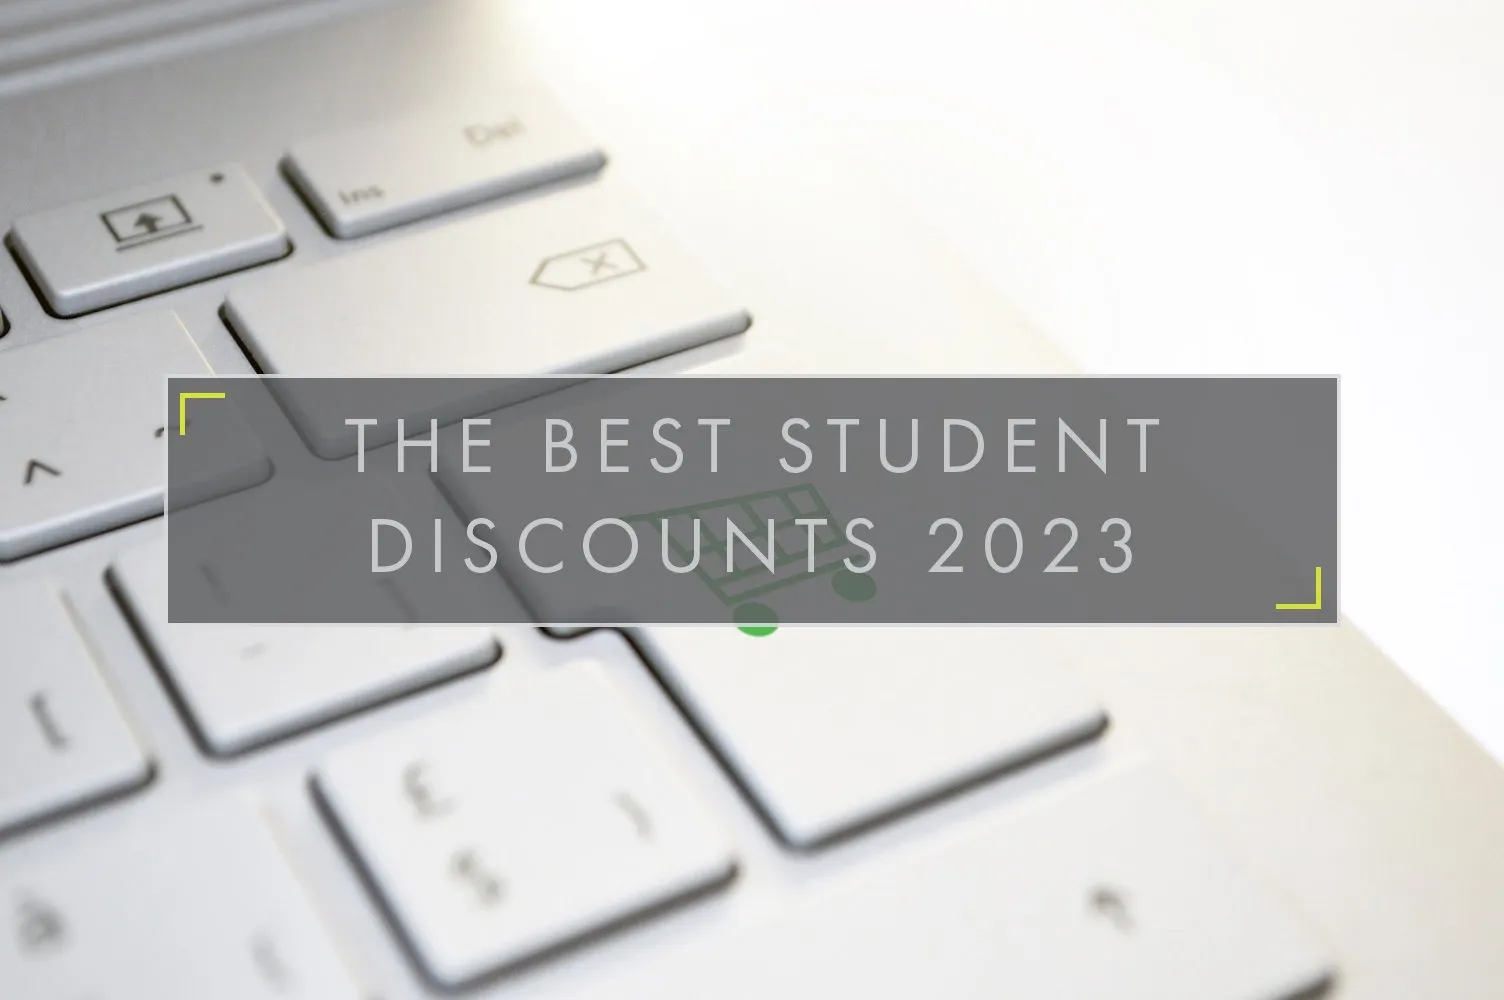 THE BEST STUDENT DISCOUNTS 2023